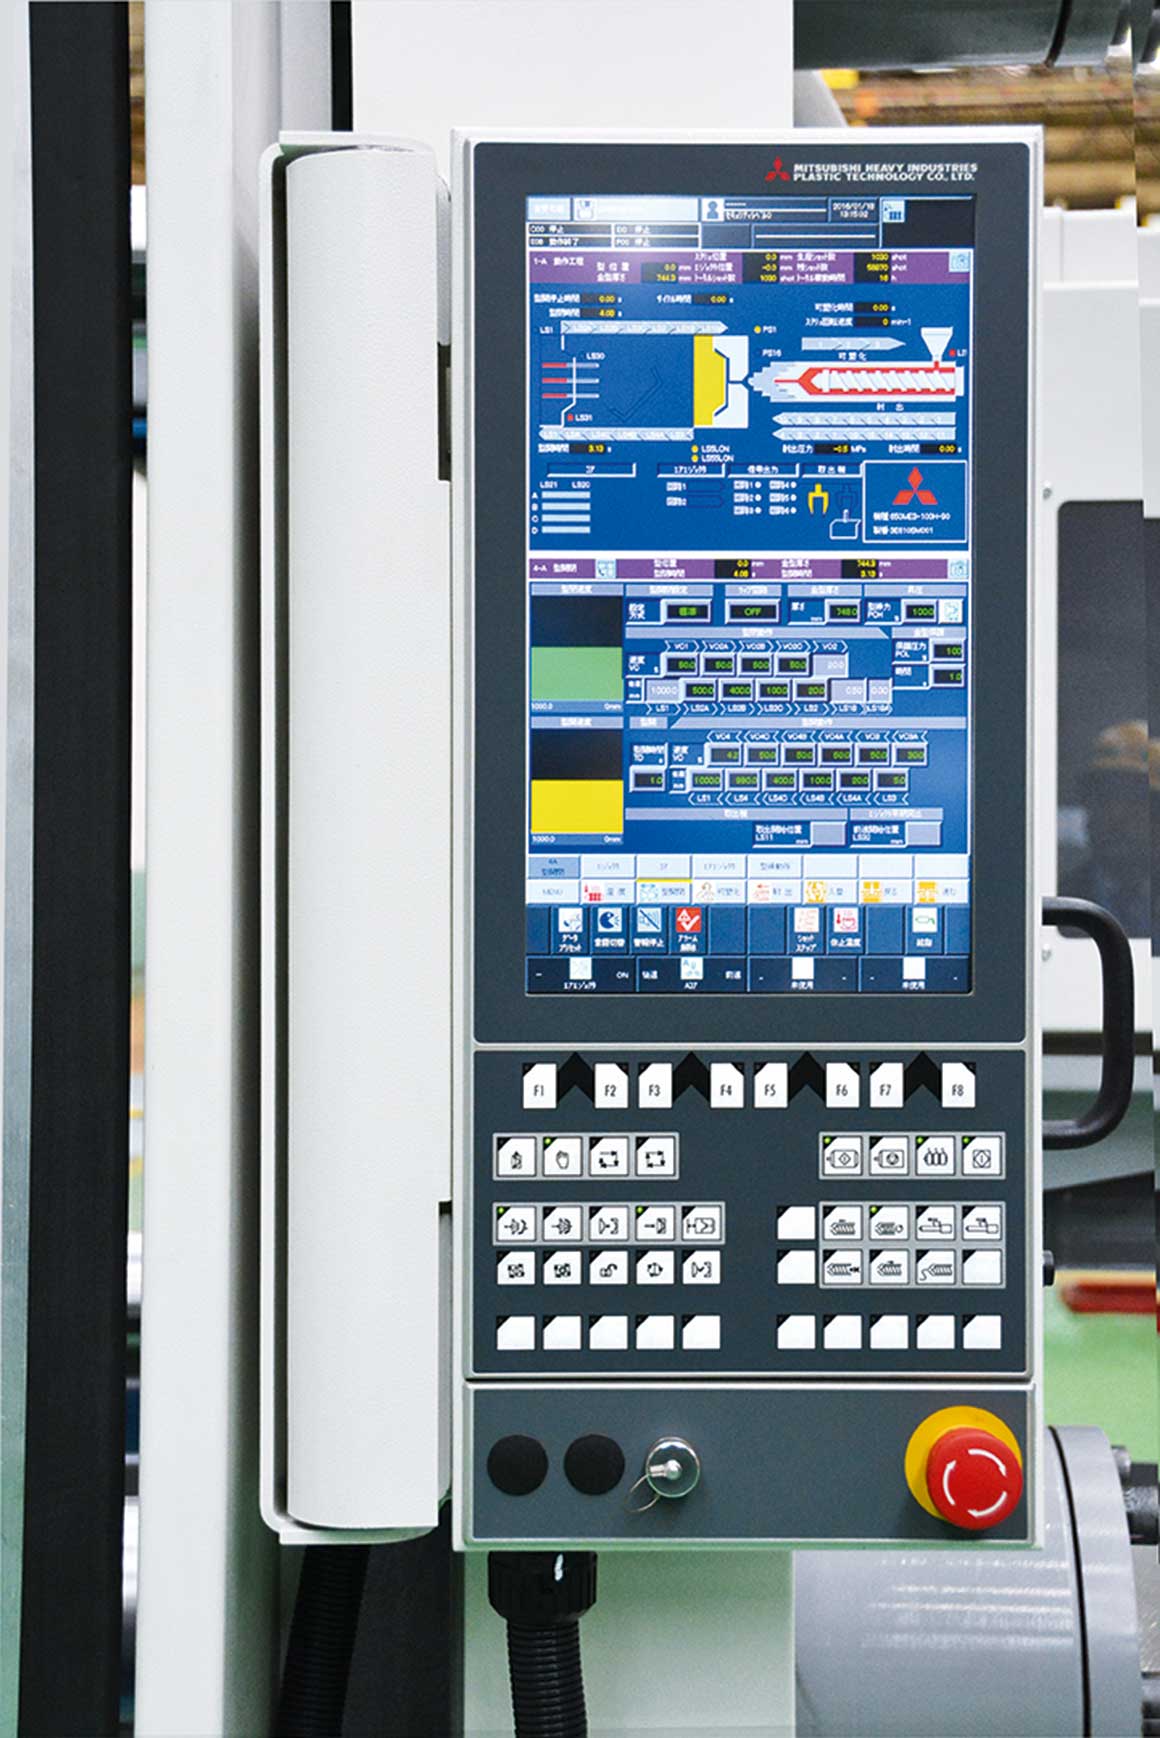 In its latest machine series, the MEIII, Mitsubishi Heavy Industries Plastic Technology (MHIPT) has opted for Beckhoff's PC-based control technology. The controller of the MEIII consists of a customer-specific CP6216 Panel PC. The 12-inch panel in portrait mode features a key arrangement that is optimized for injection molding and designed for most applications. 